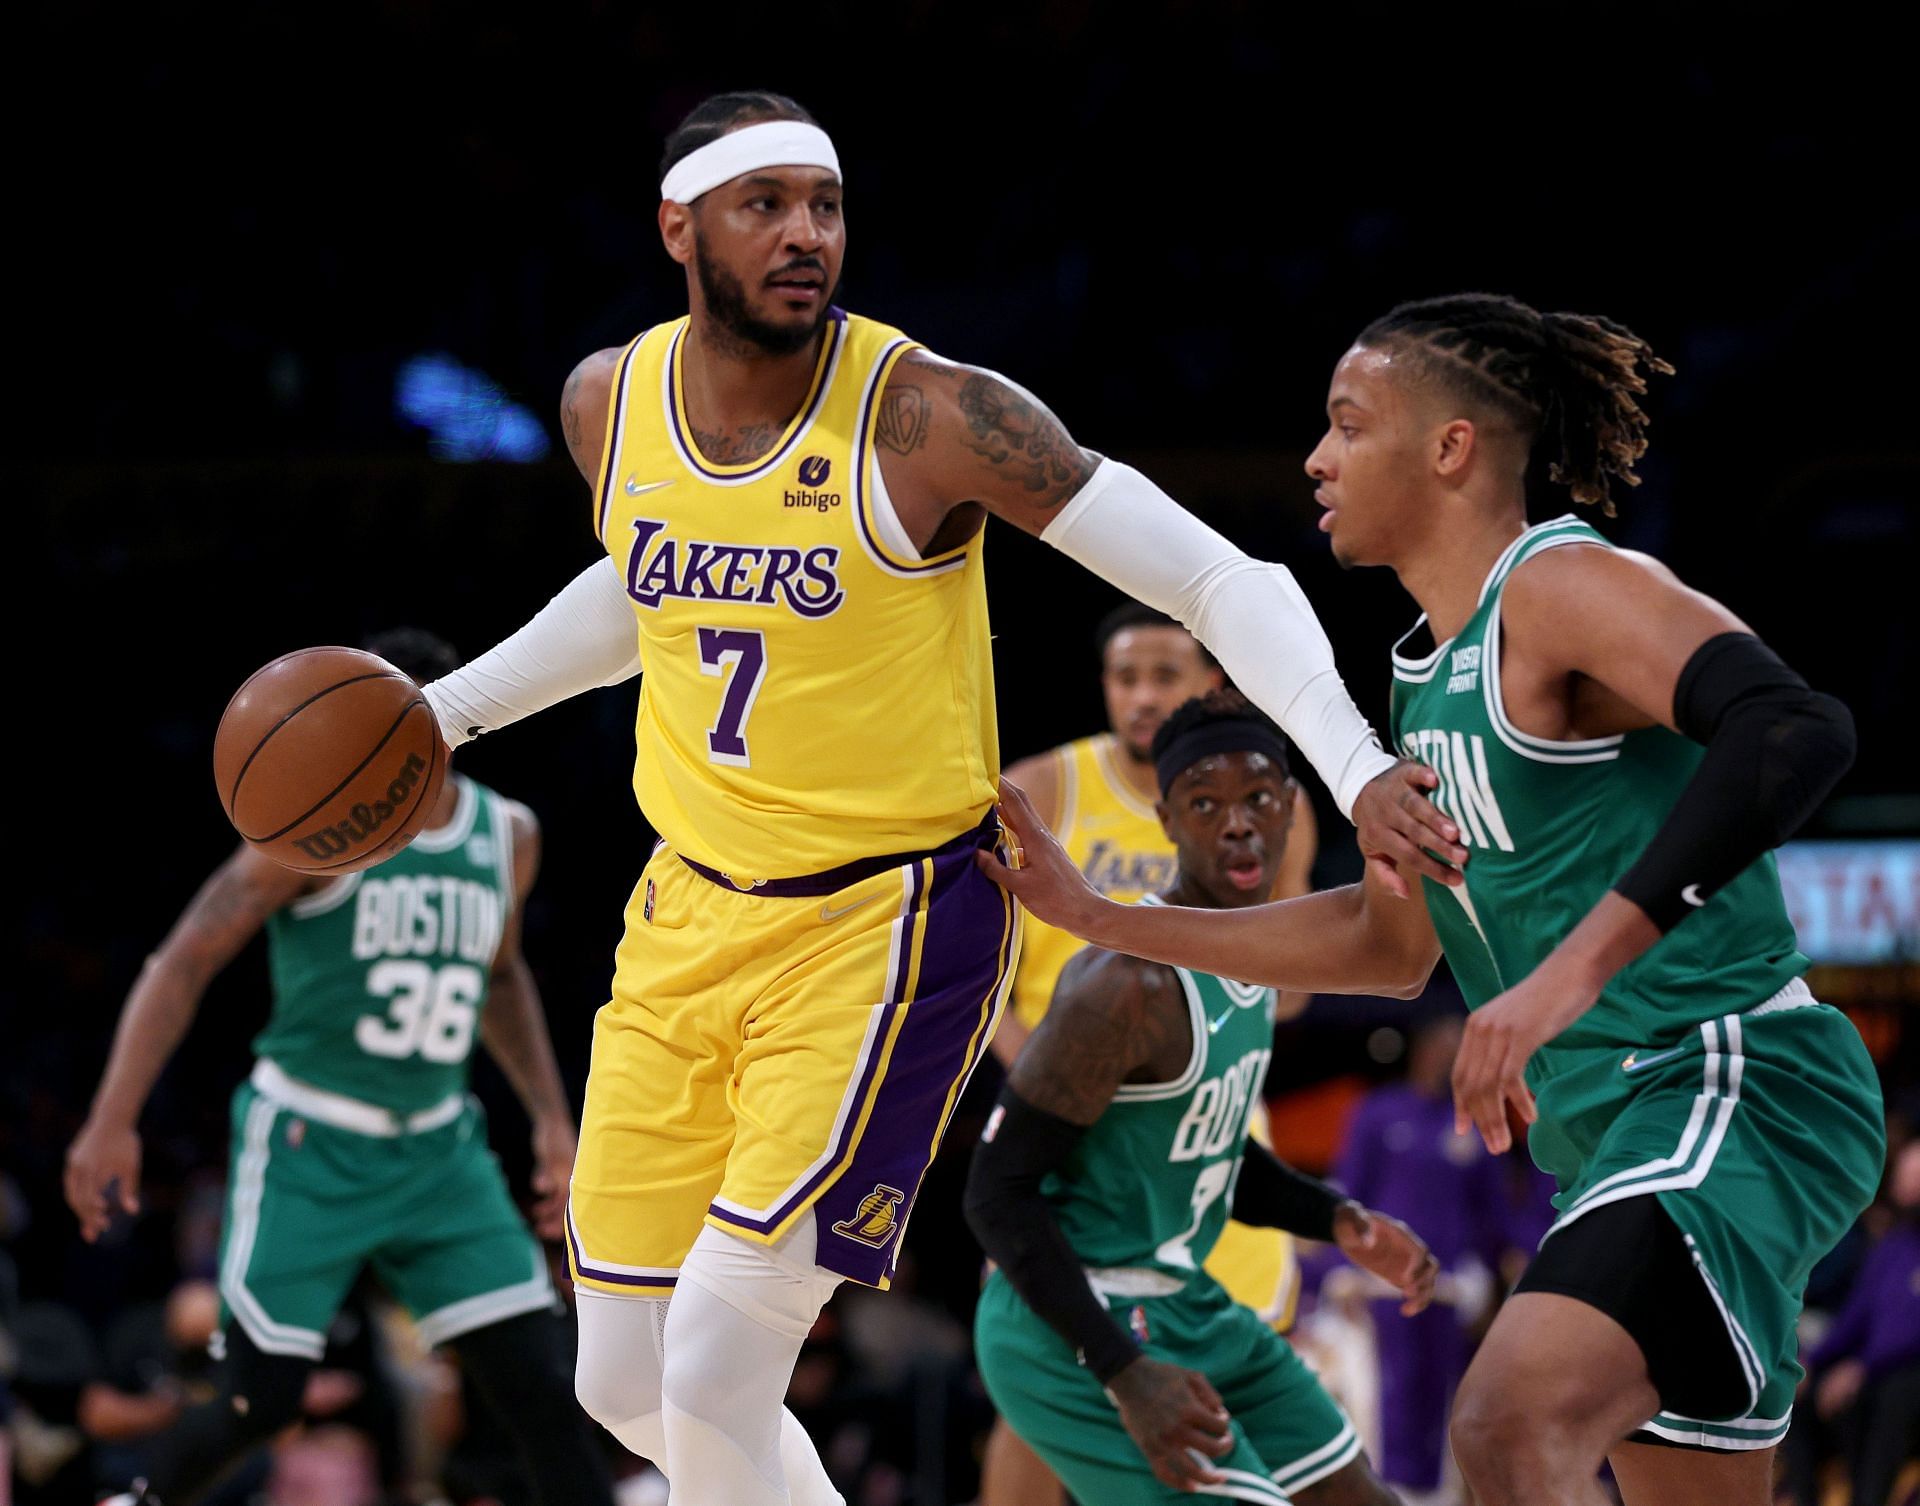 Carmelo Anthony #7 of the Los Angeles Lakers controls the ball in front of Romeo Langford #9 of the Boston Celtics during the first half at Staples Center on December 07, 2021 in Los Angeles, California.